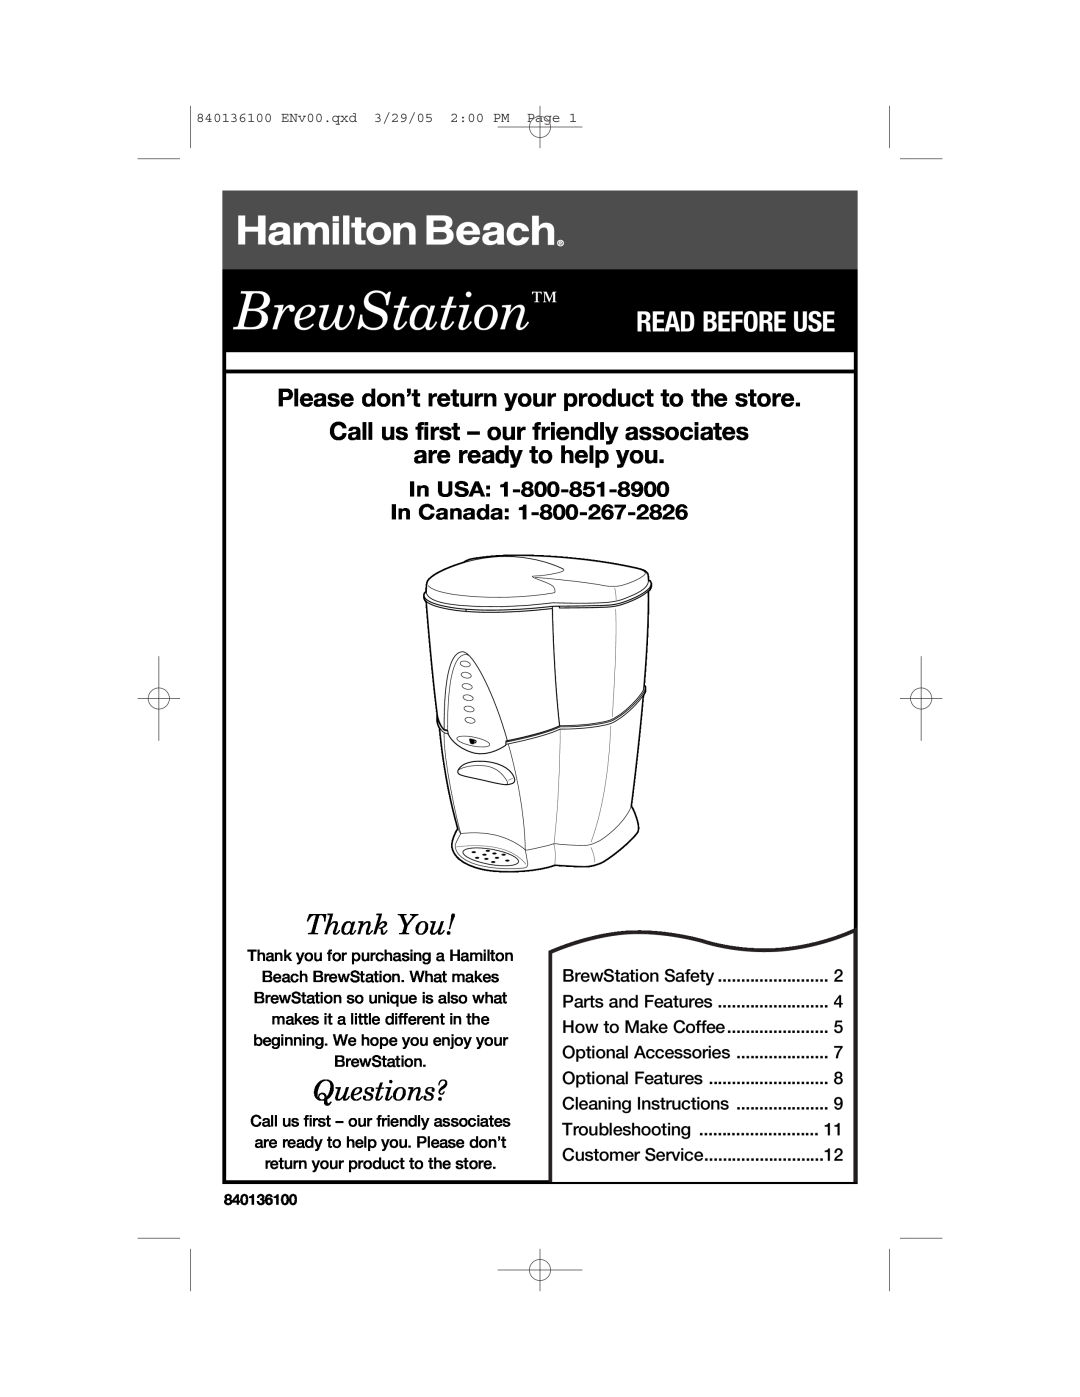 Hamilton Beach 840136100 manual Thank You, Questions?, Please don’t return your product to the store, In USA In Canada 